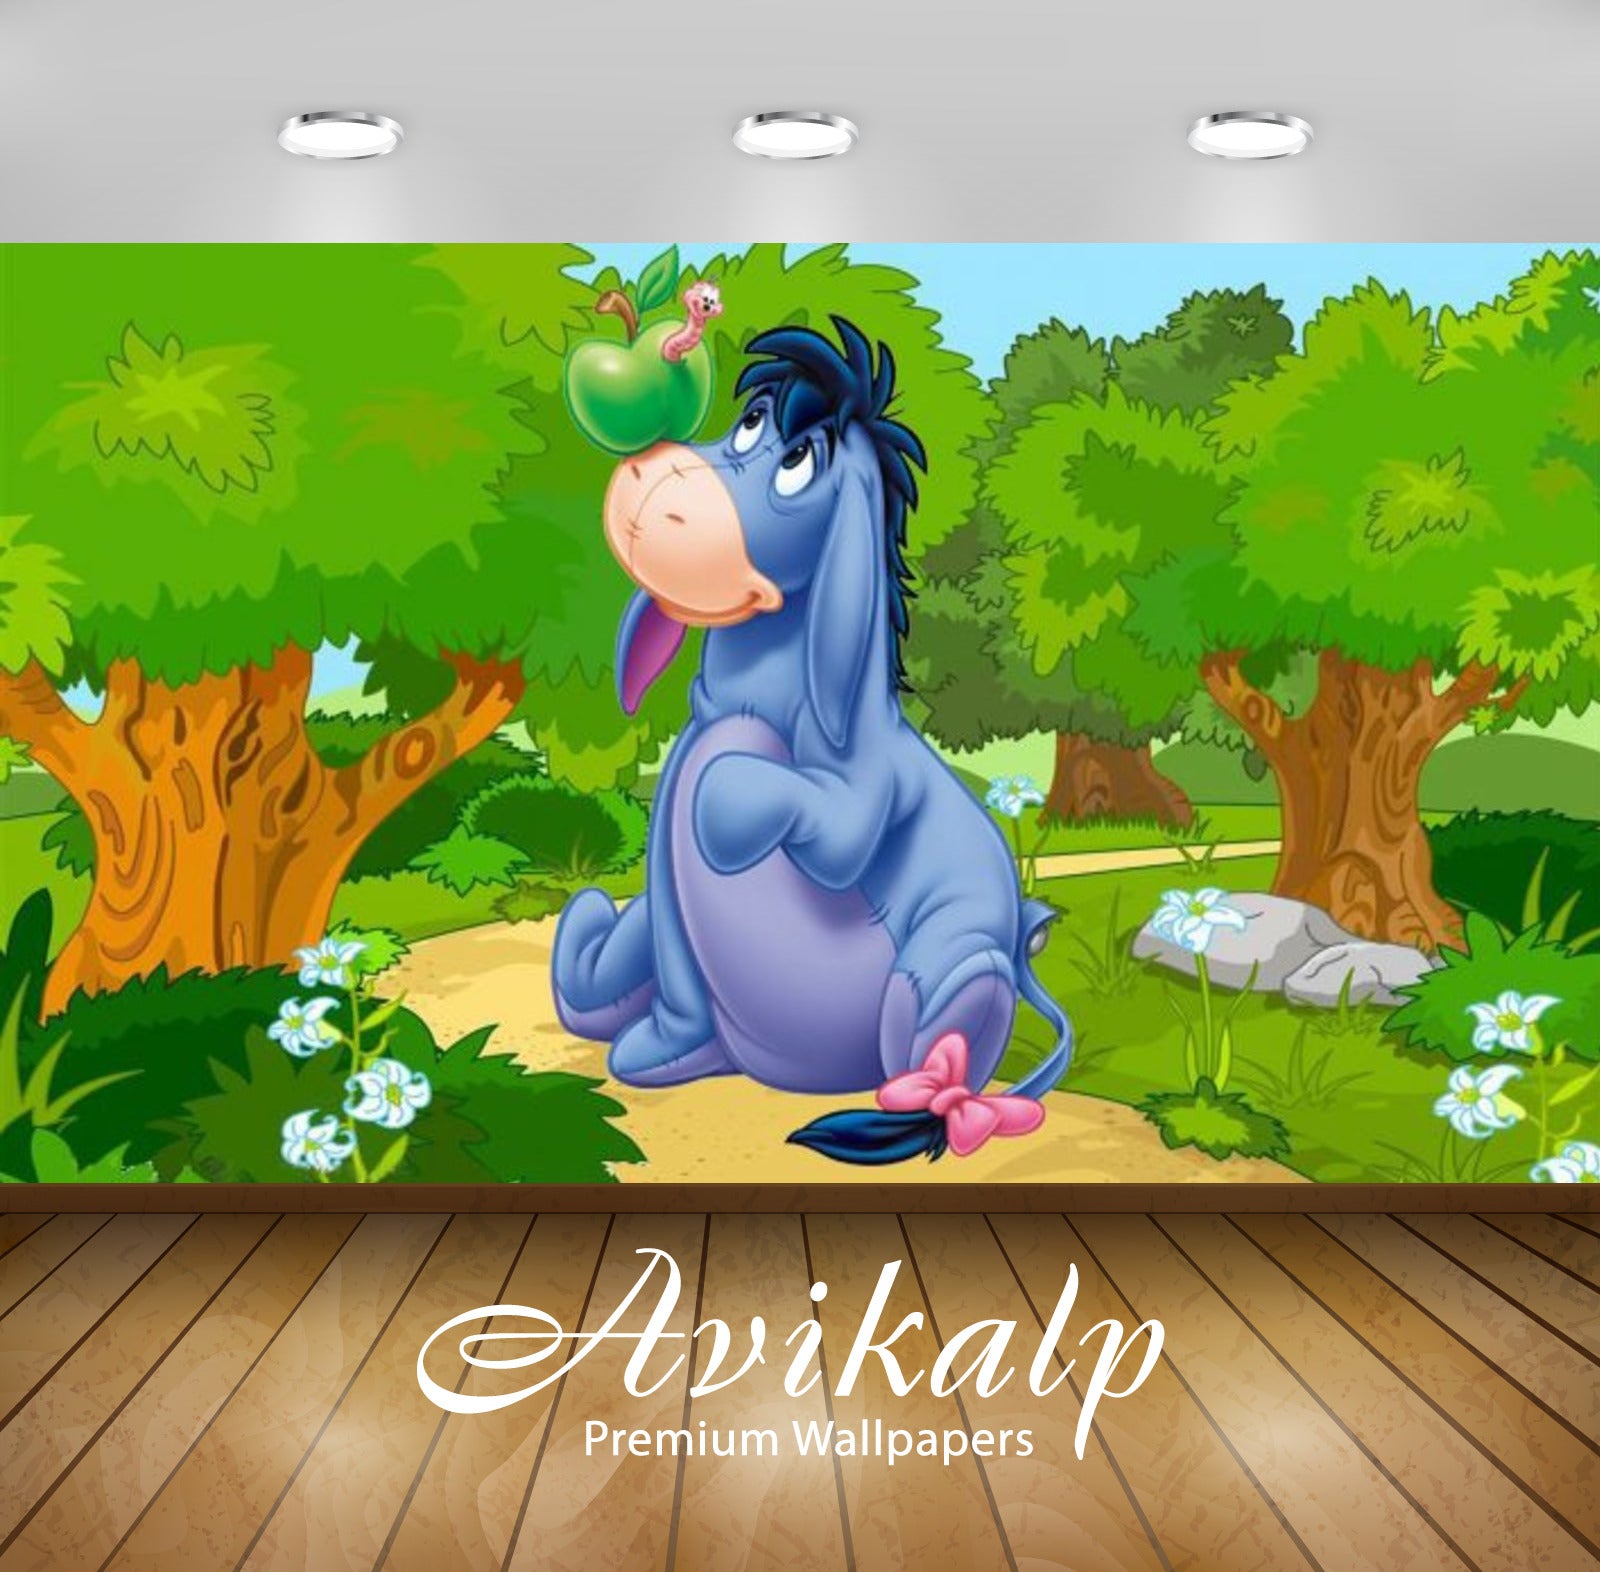 Avikalp Exclusive Awi2330 Winnie the Pooh Eeyore gray donkey and worm apple Full HD Wallpapers for L